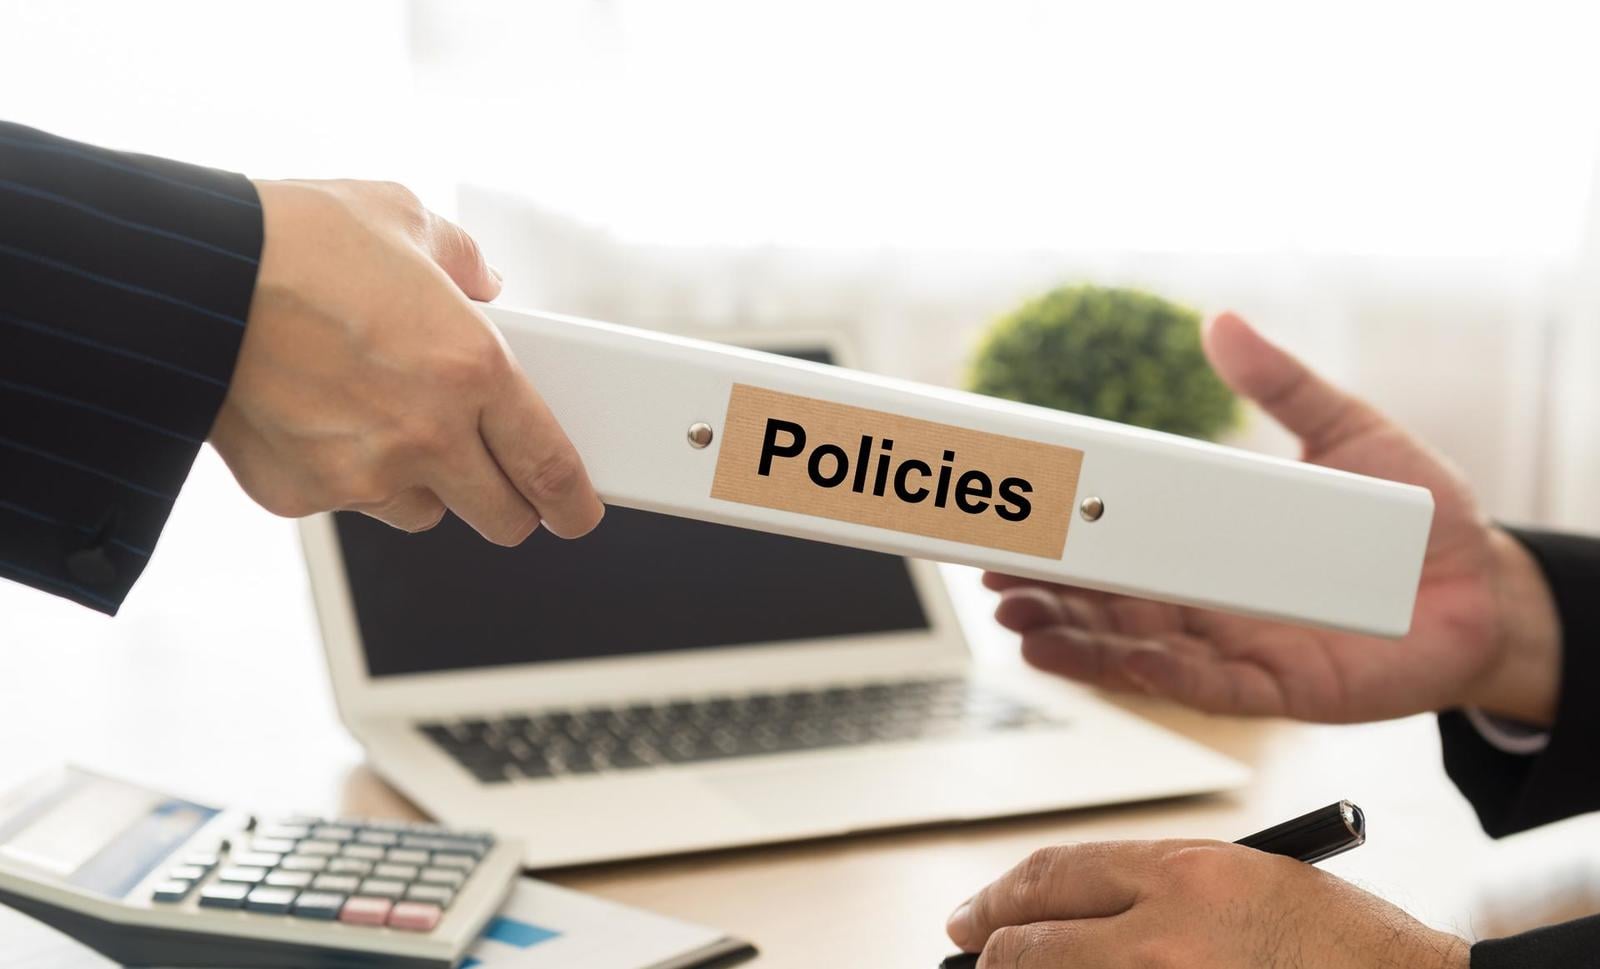 Policies - only useful as part of an integrated system, not as a binder of documents